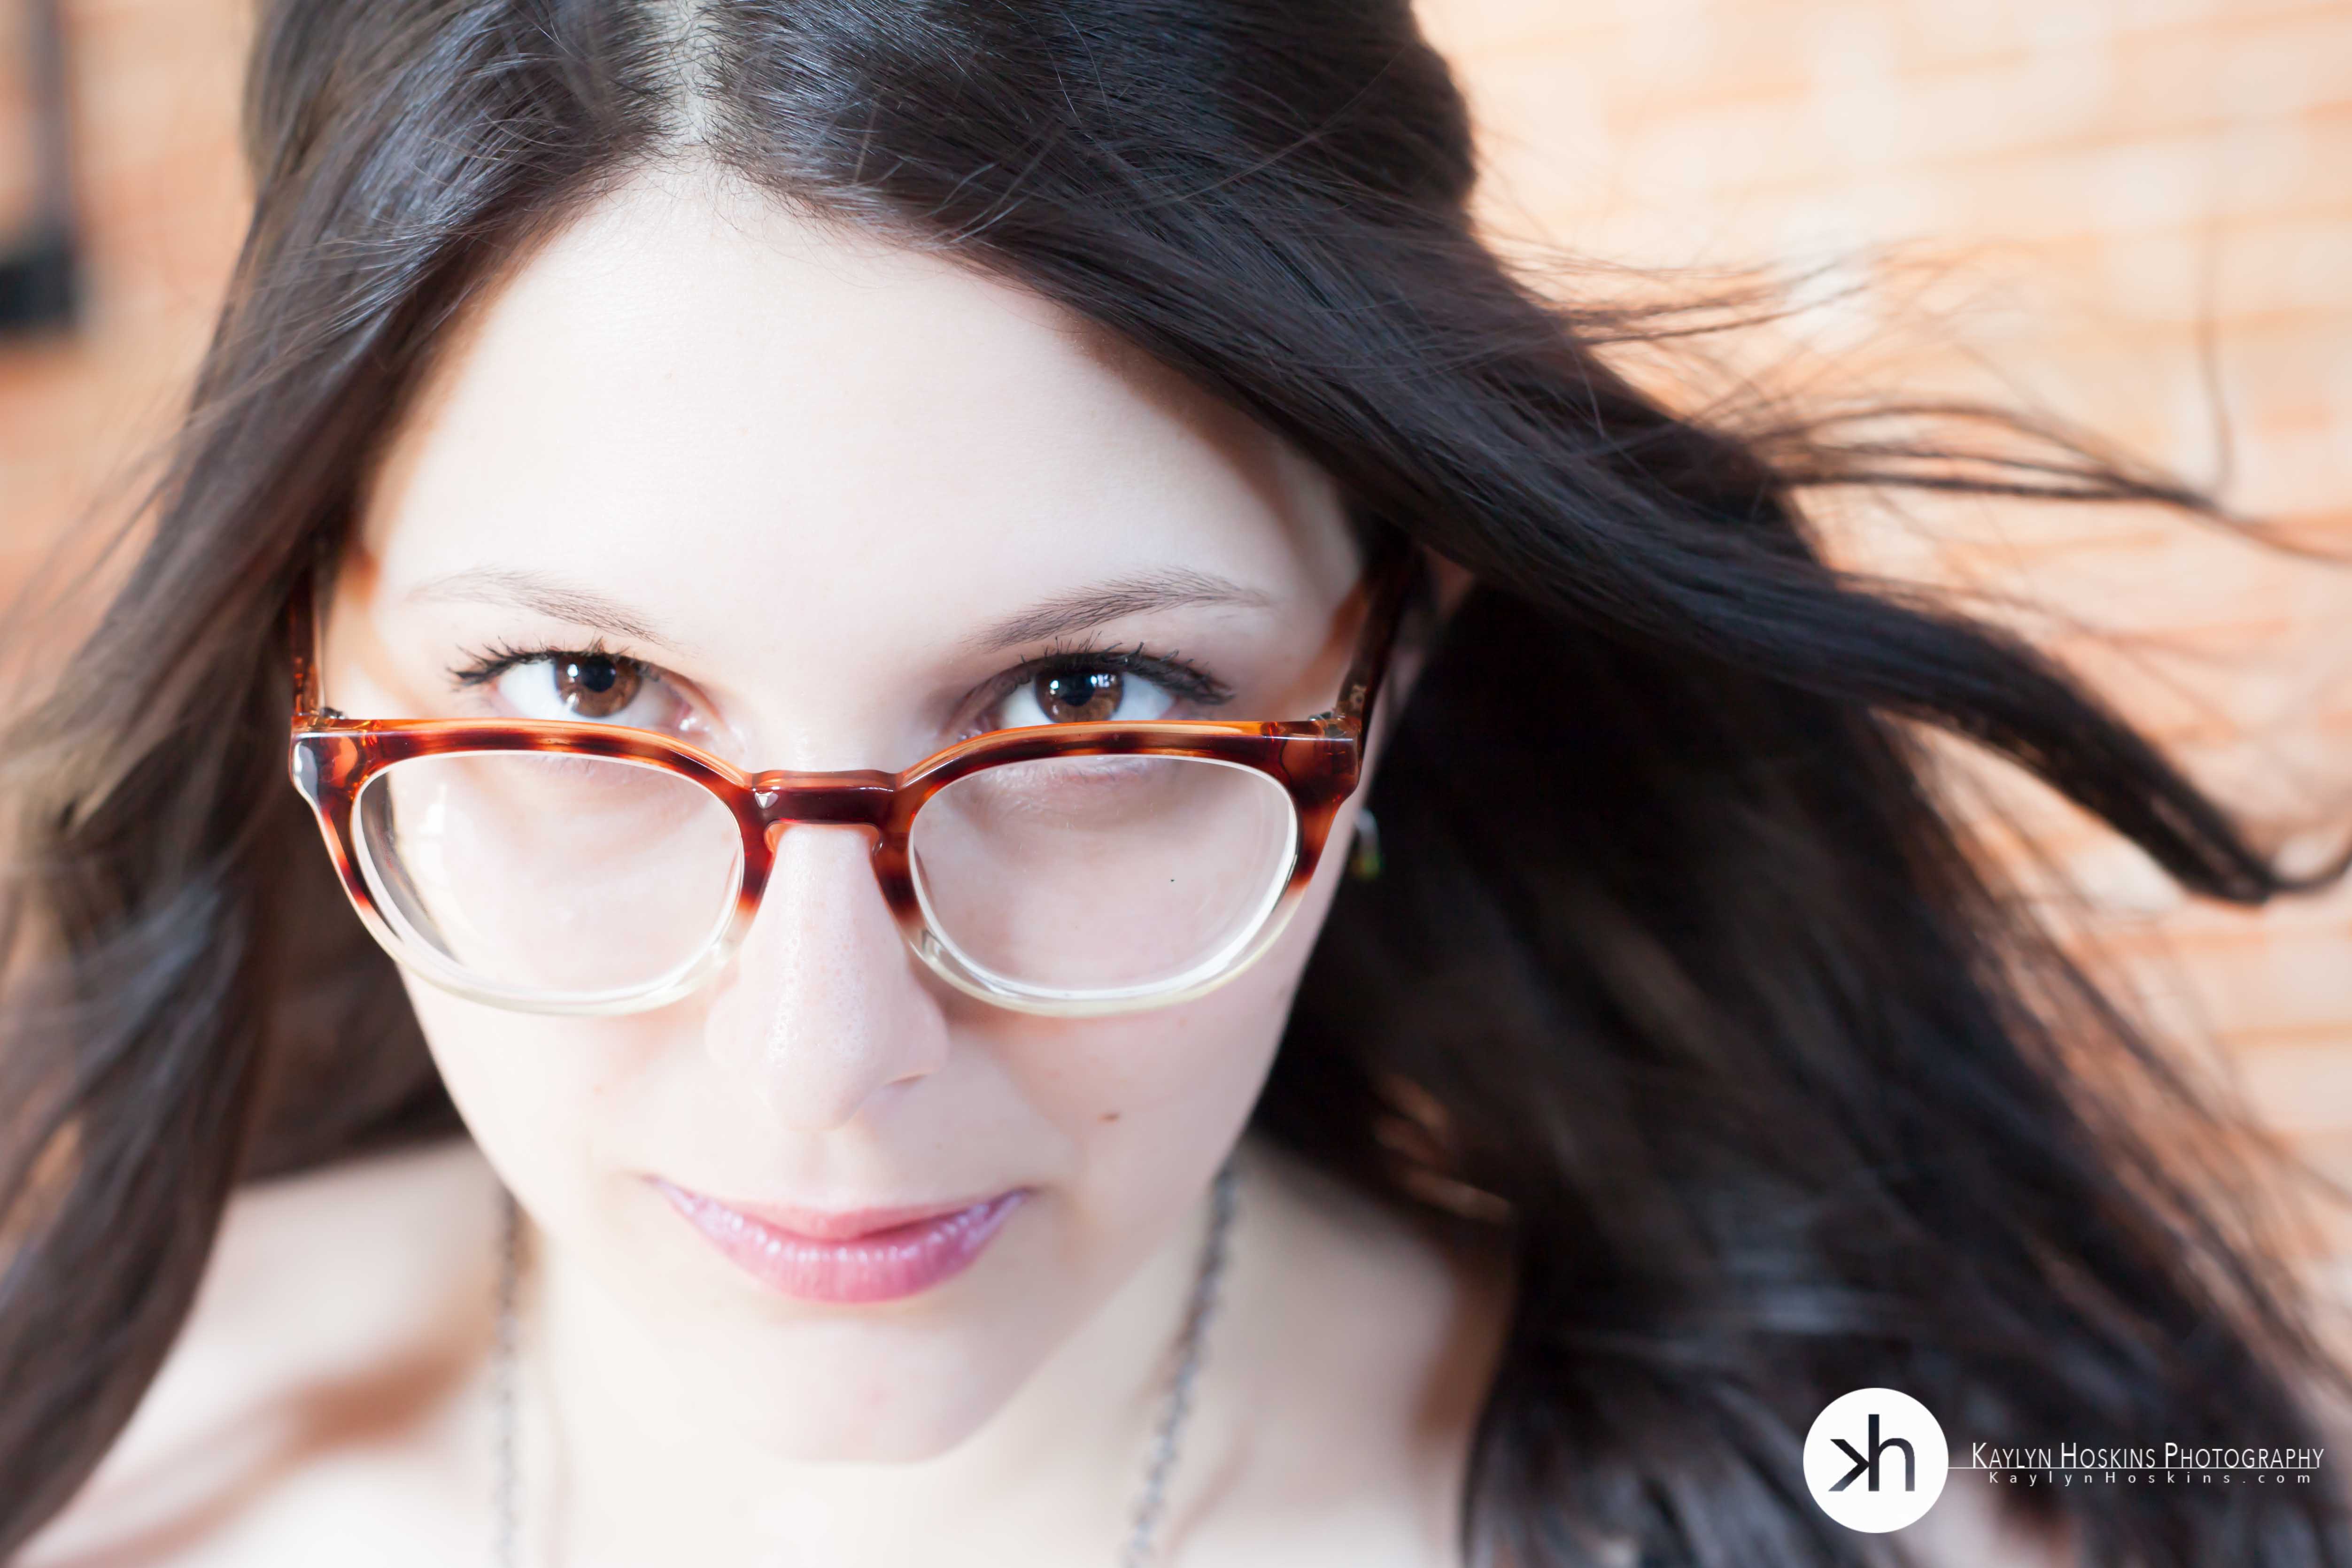 Boudoir client Suzie looks over her glasses during boudoir experience with Kaylyn Hoskins Photography